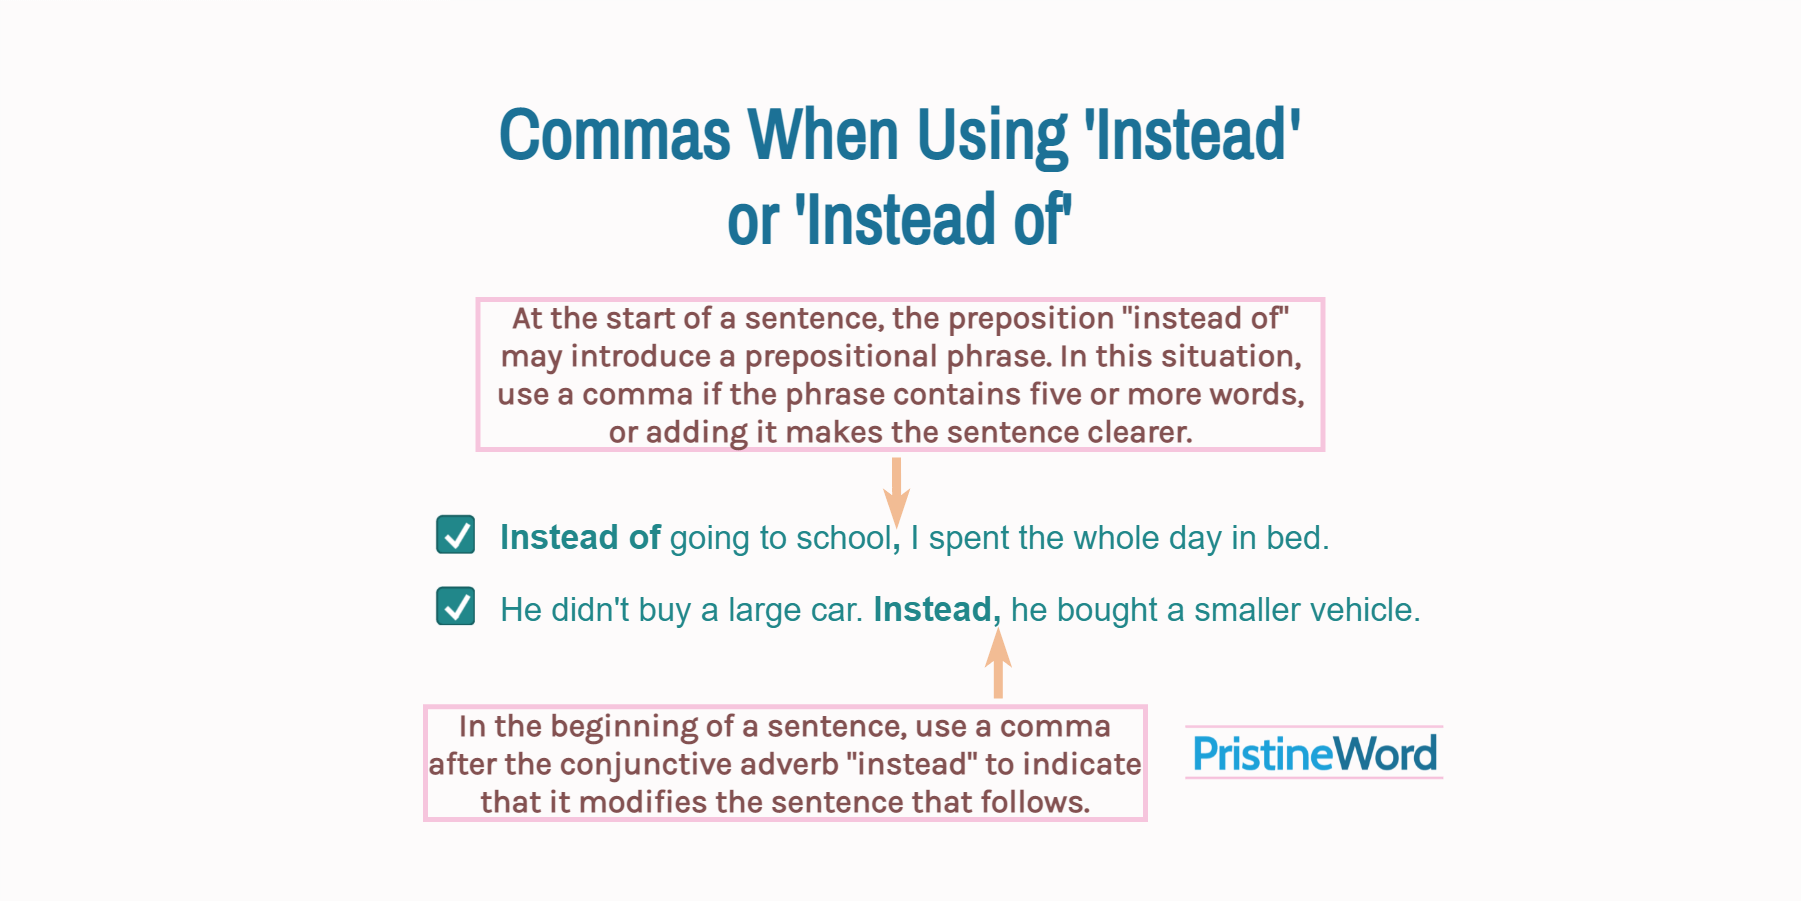 Commas When Using 'Instead' or 'Instead of'